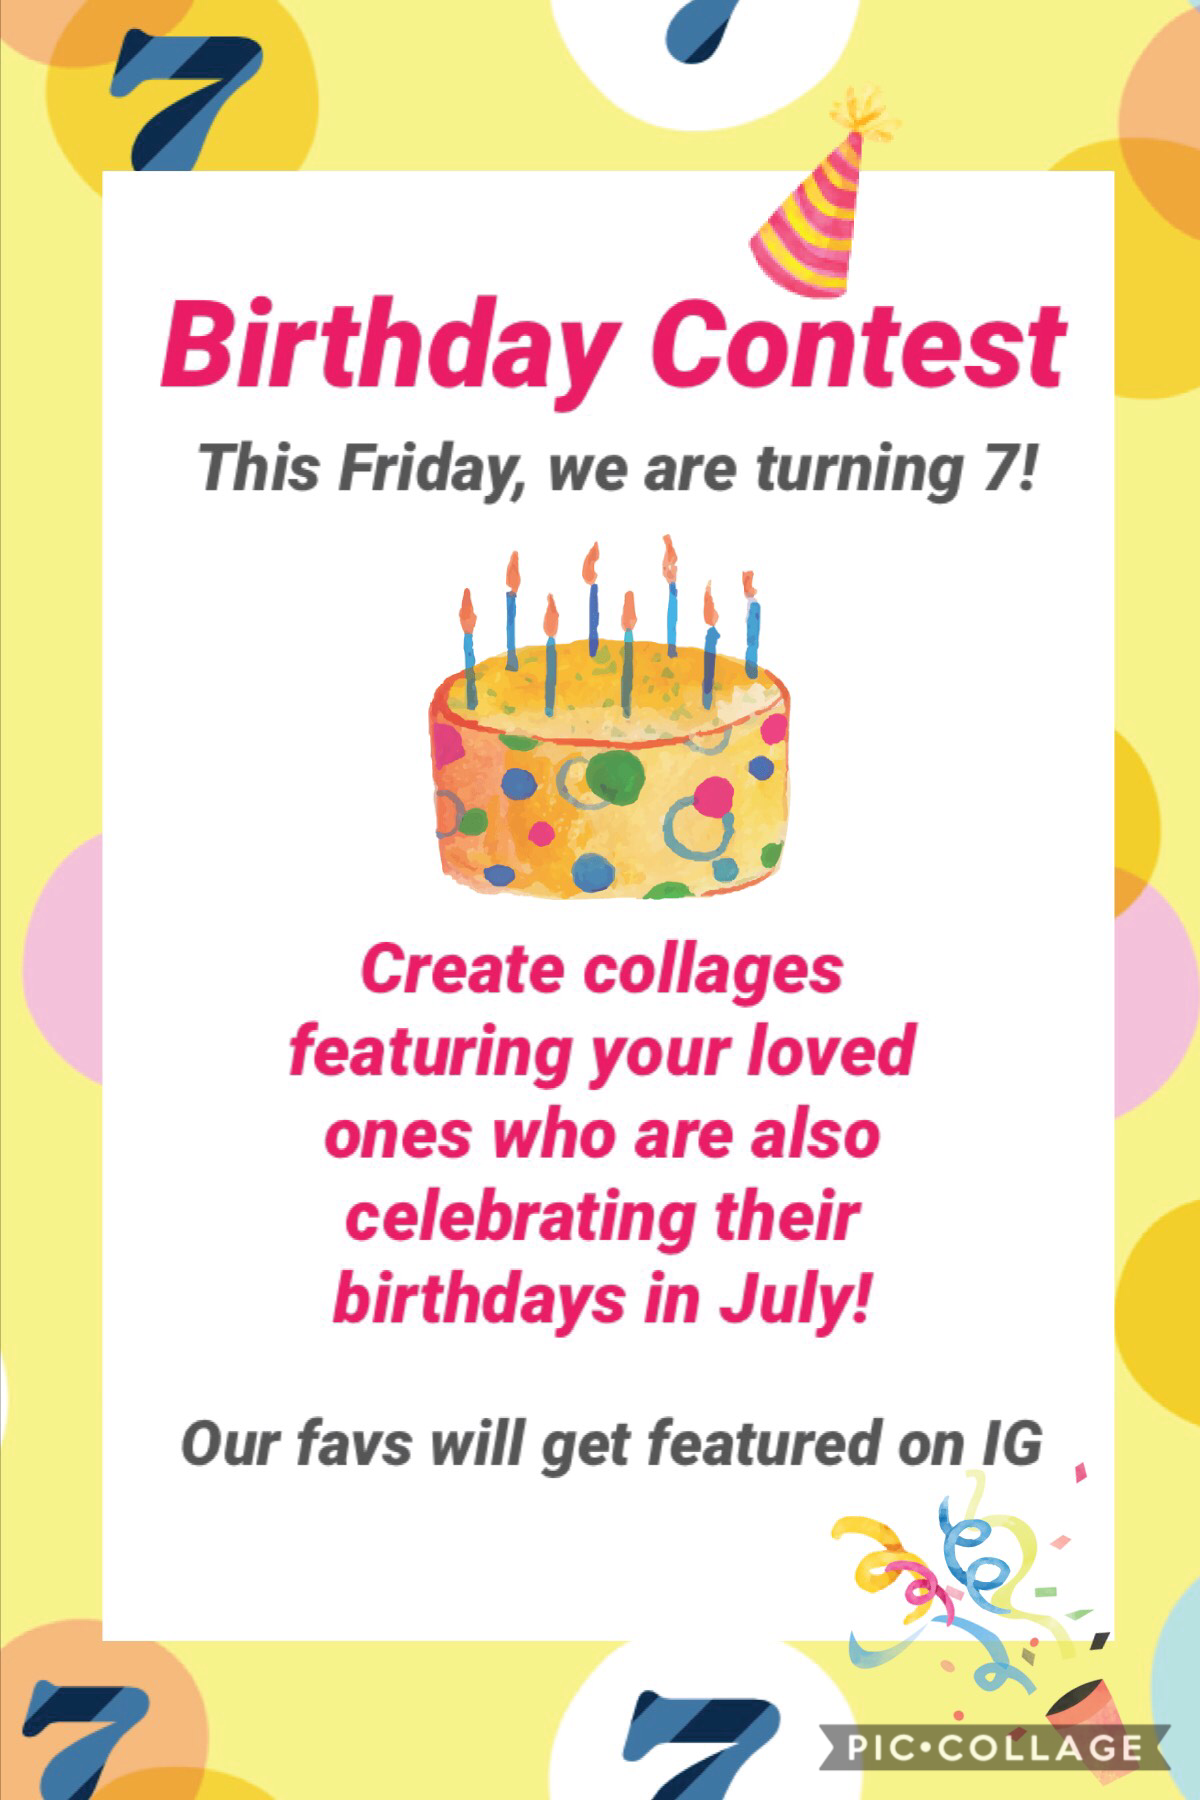 Join us to celebrate PicCollage’s 7th birthday by creating collages featuring your loved ones who are also celebrating their birthdays in July! 